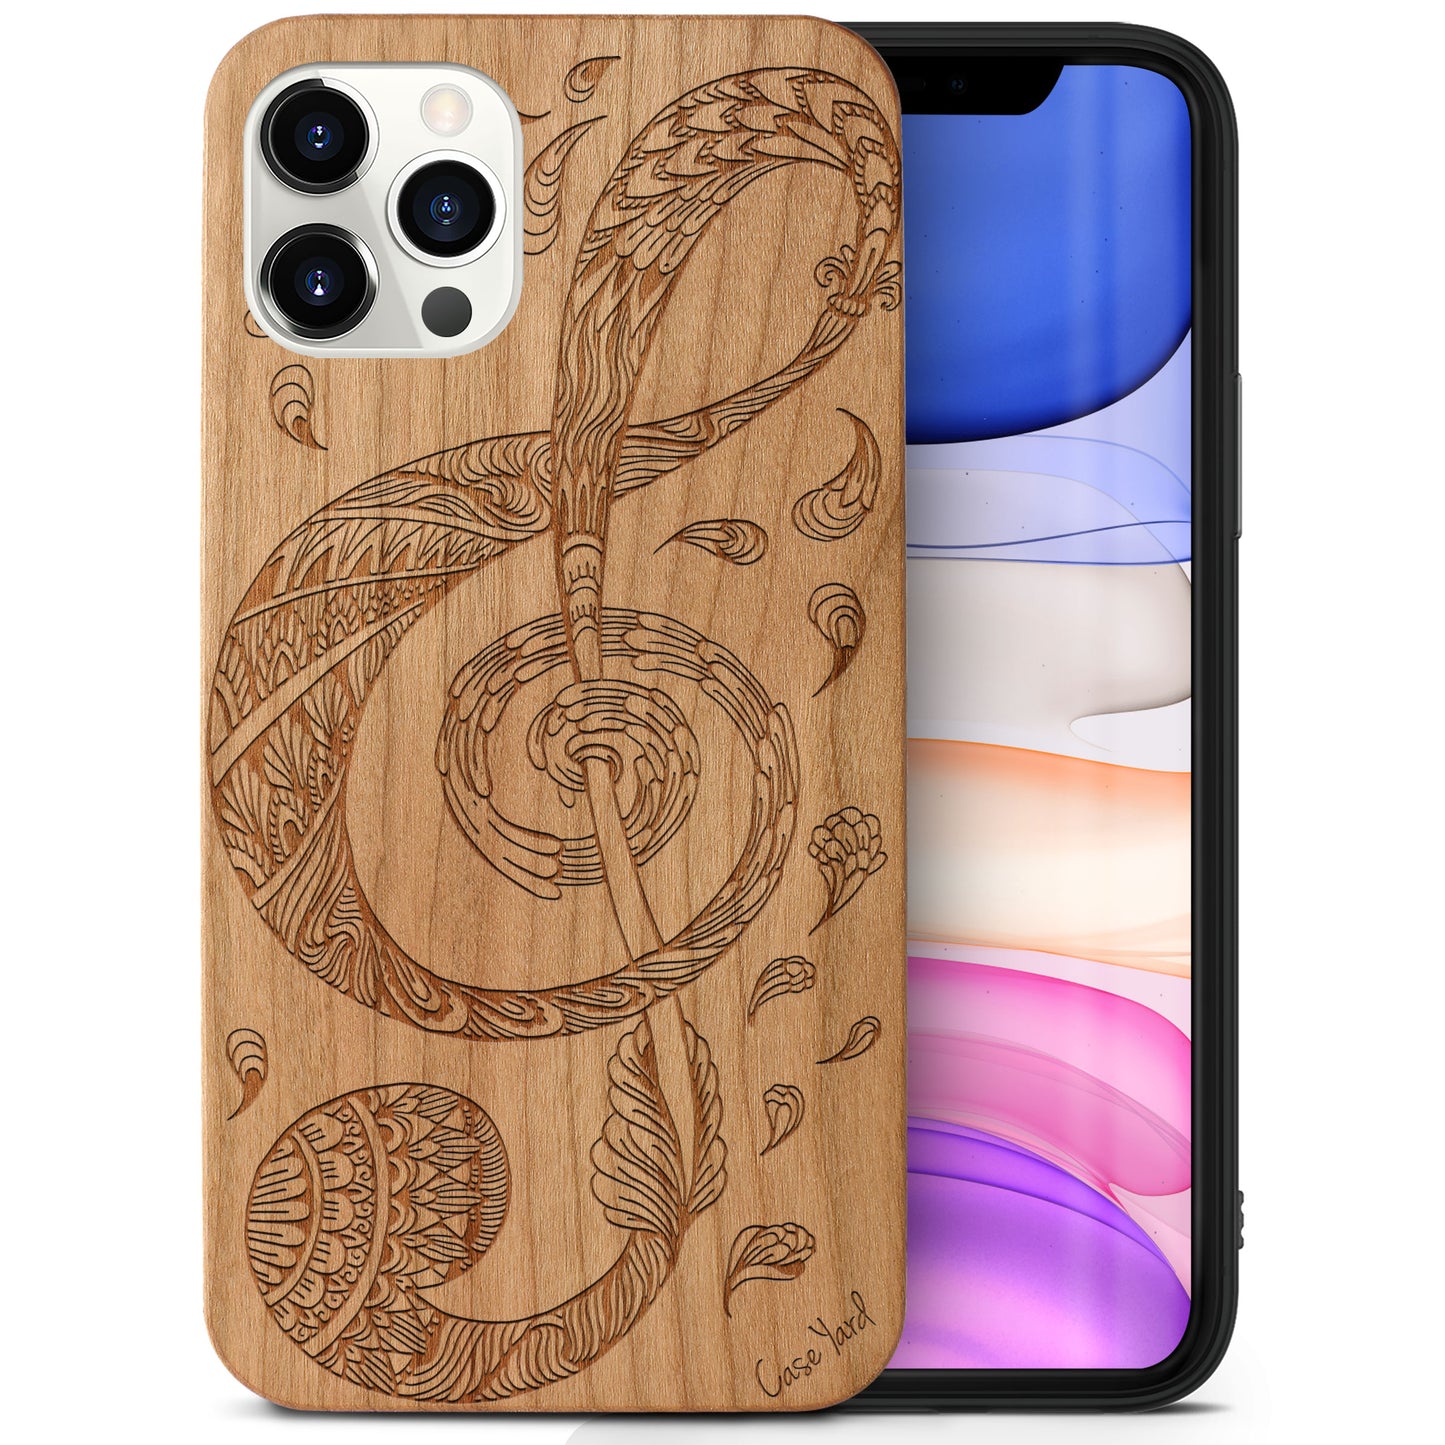 Wooden Cell Phone Case Cover, Laser Engraved case for iPhone & Samsung phone Floral Music Key Wood Design